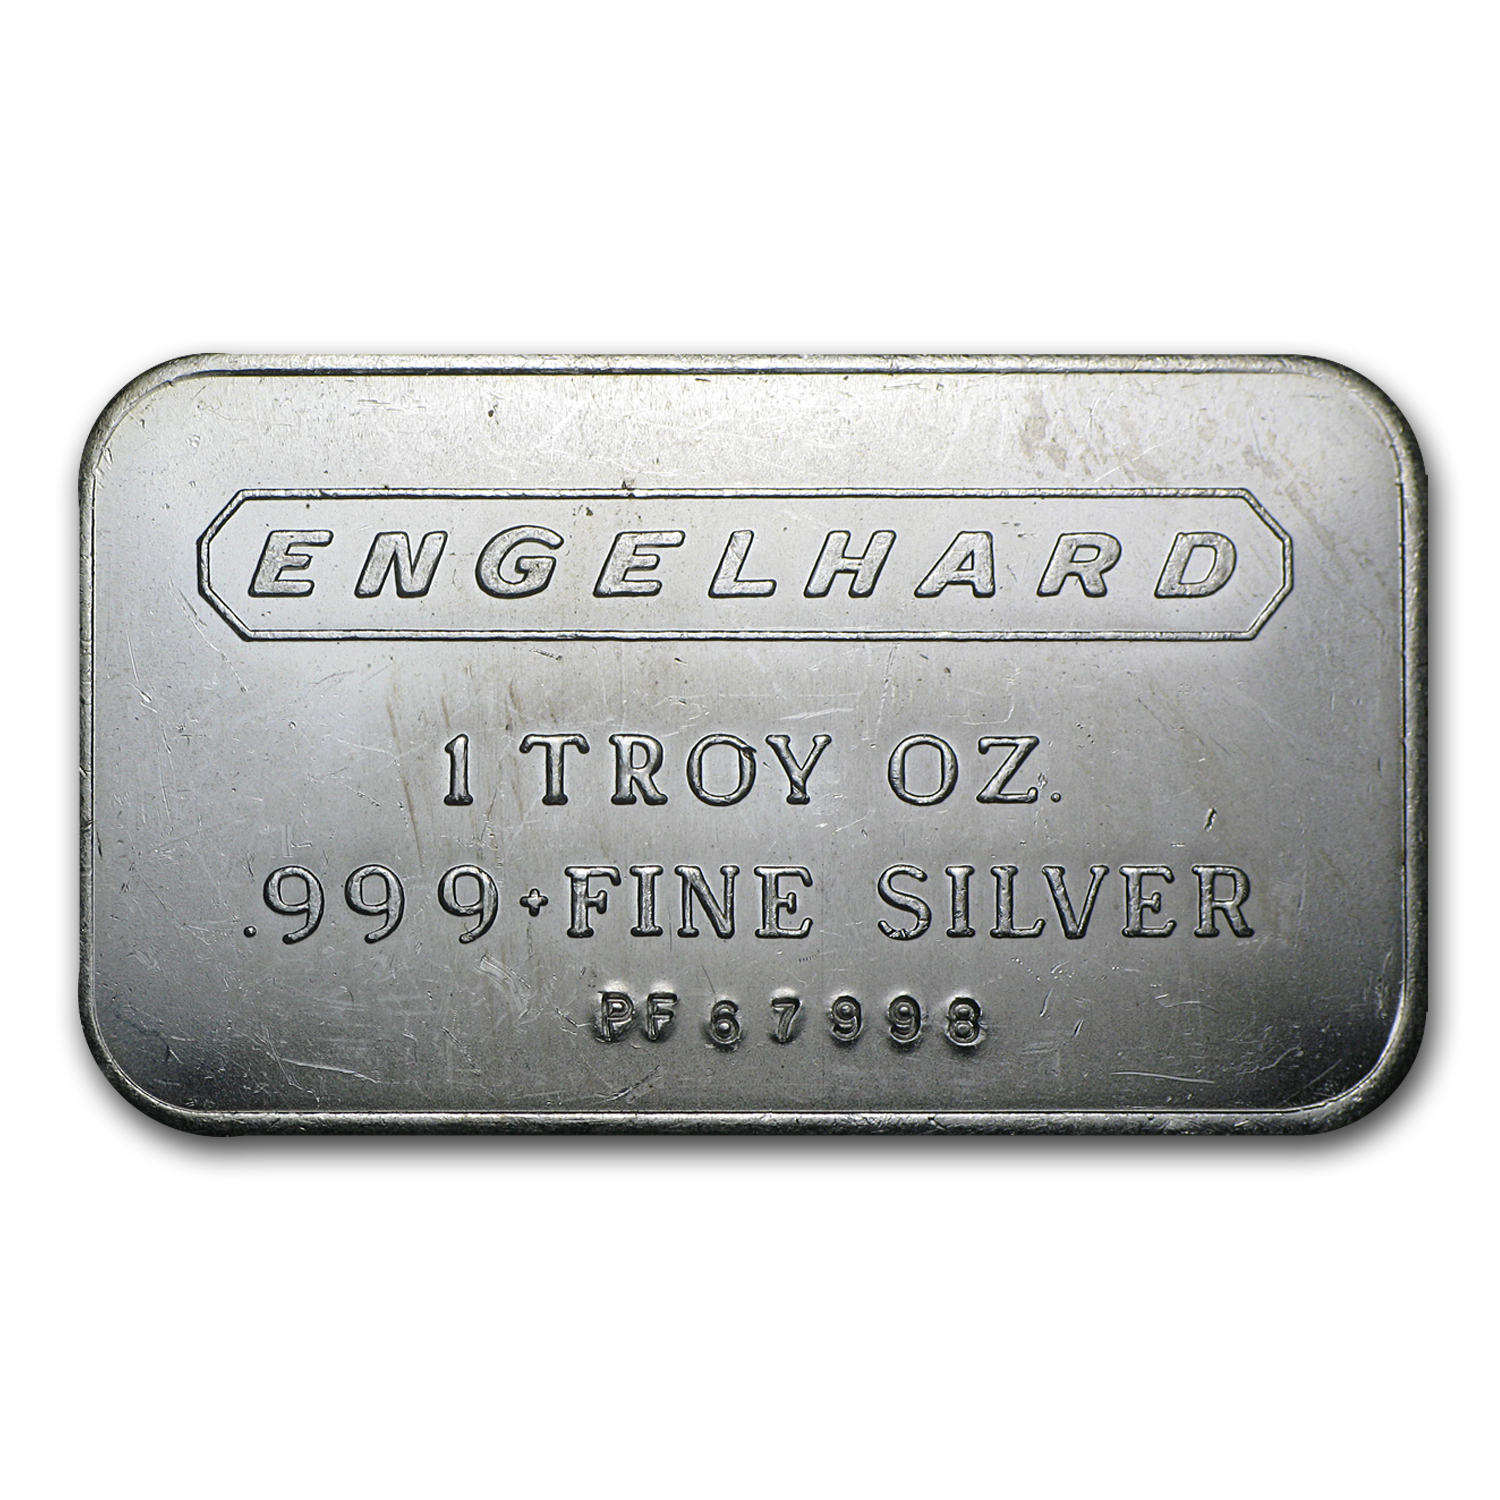 places to buy engelhard silver bars